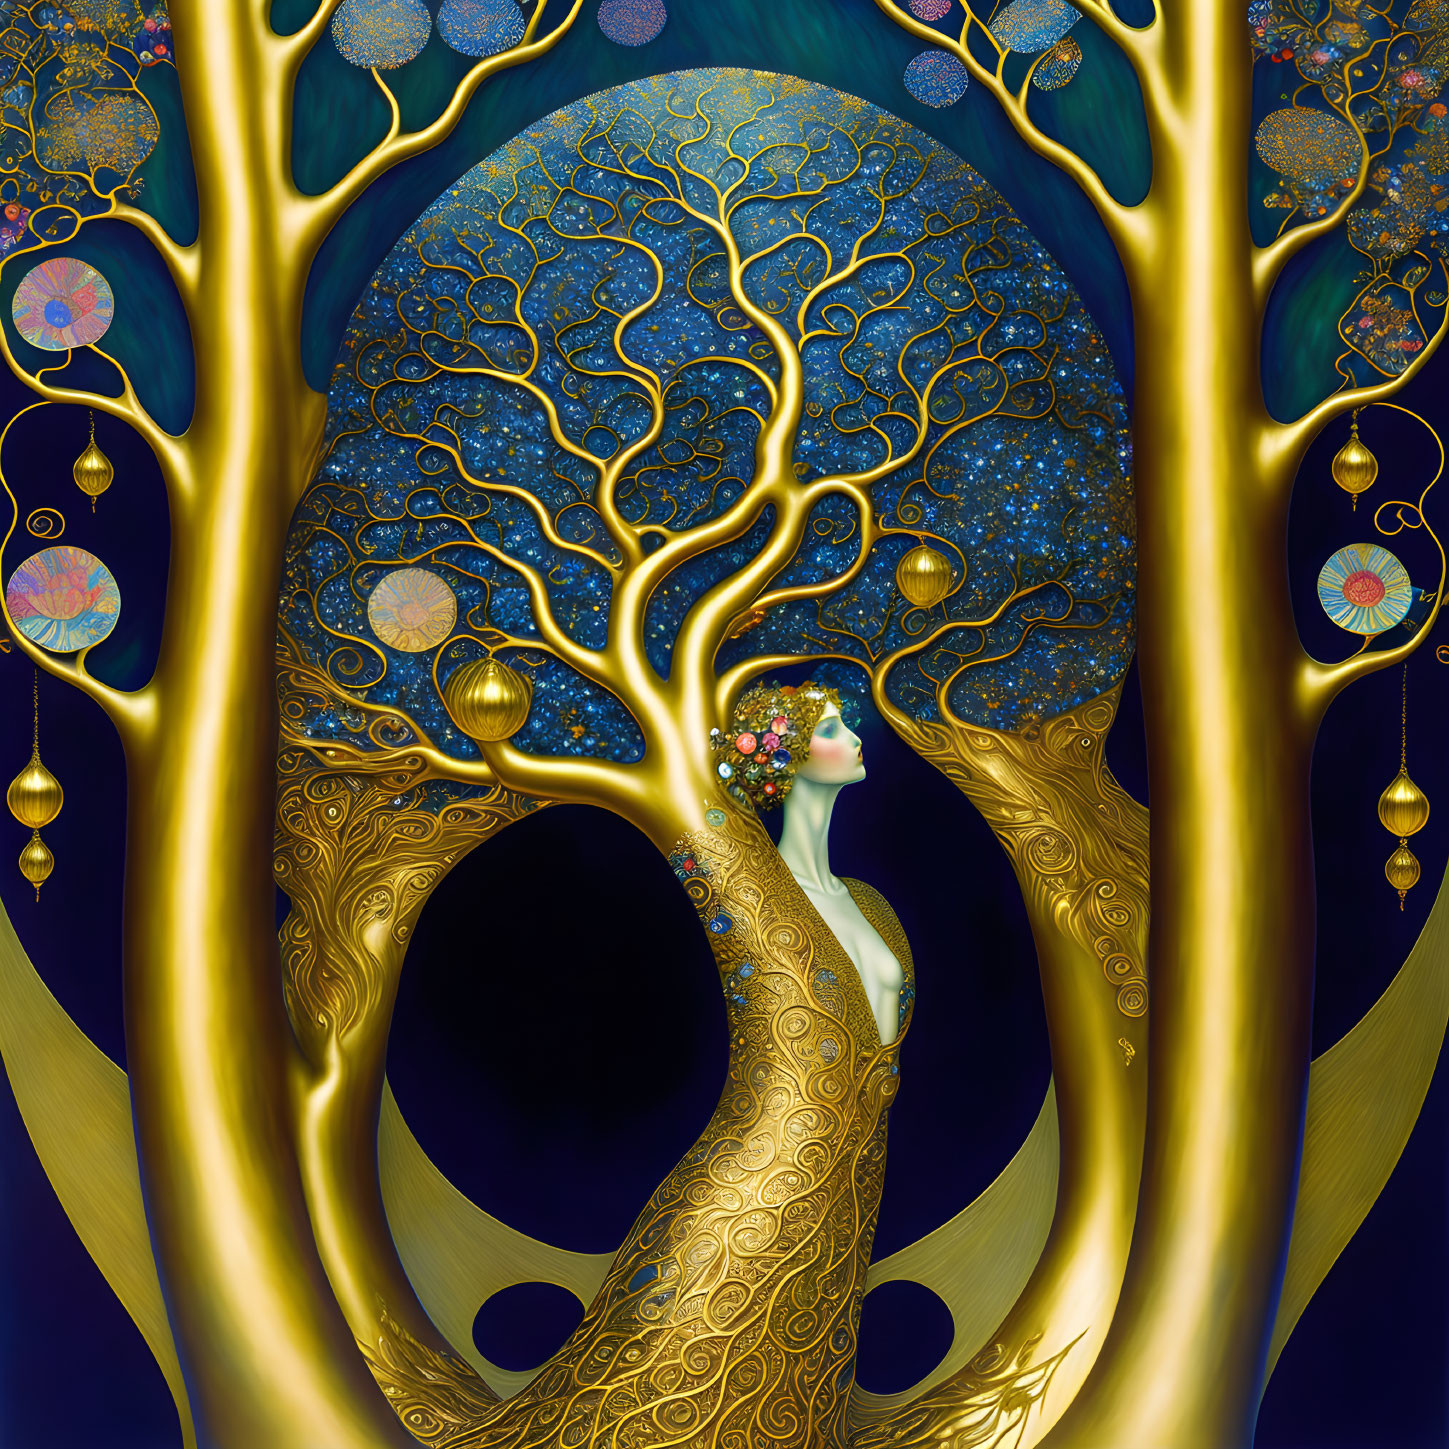 The Golden Dryad